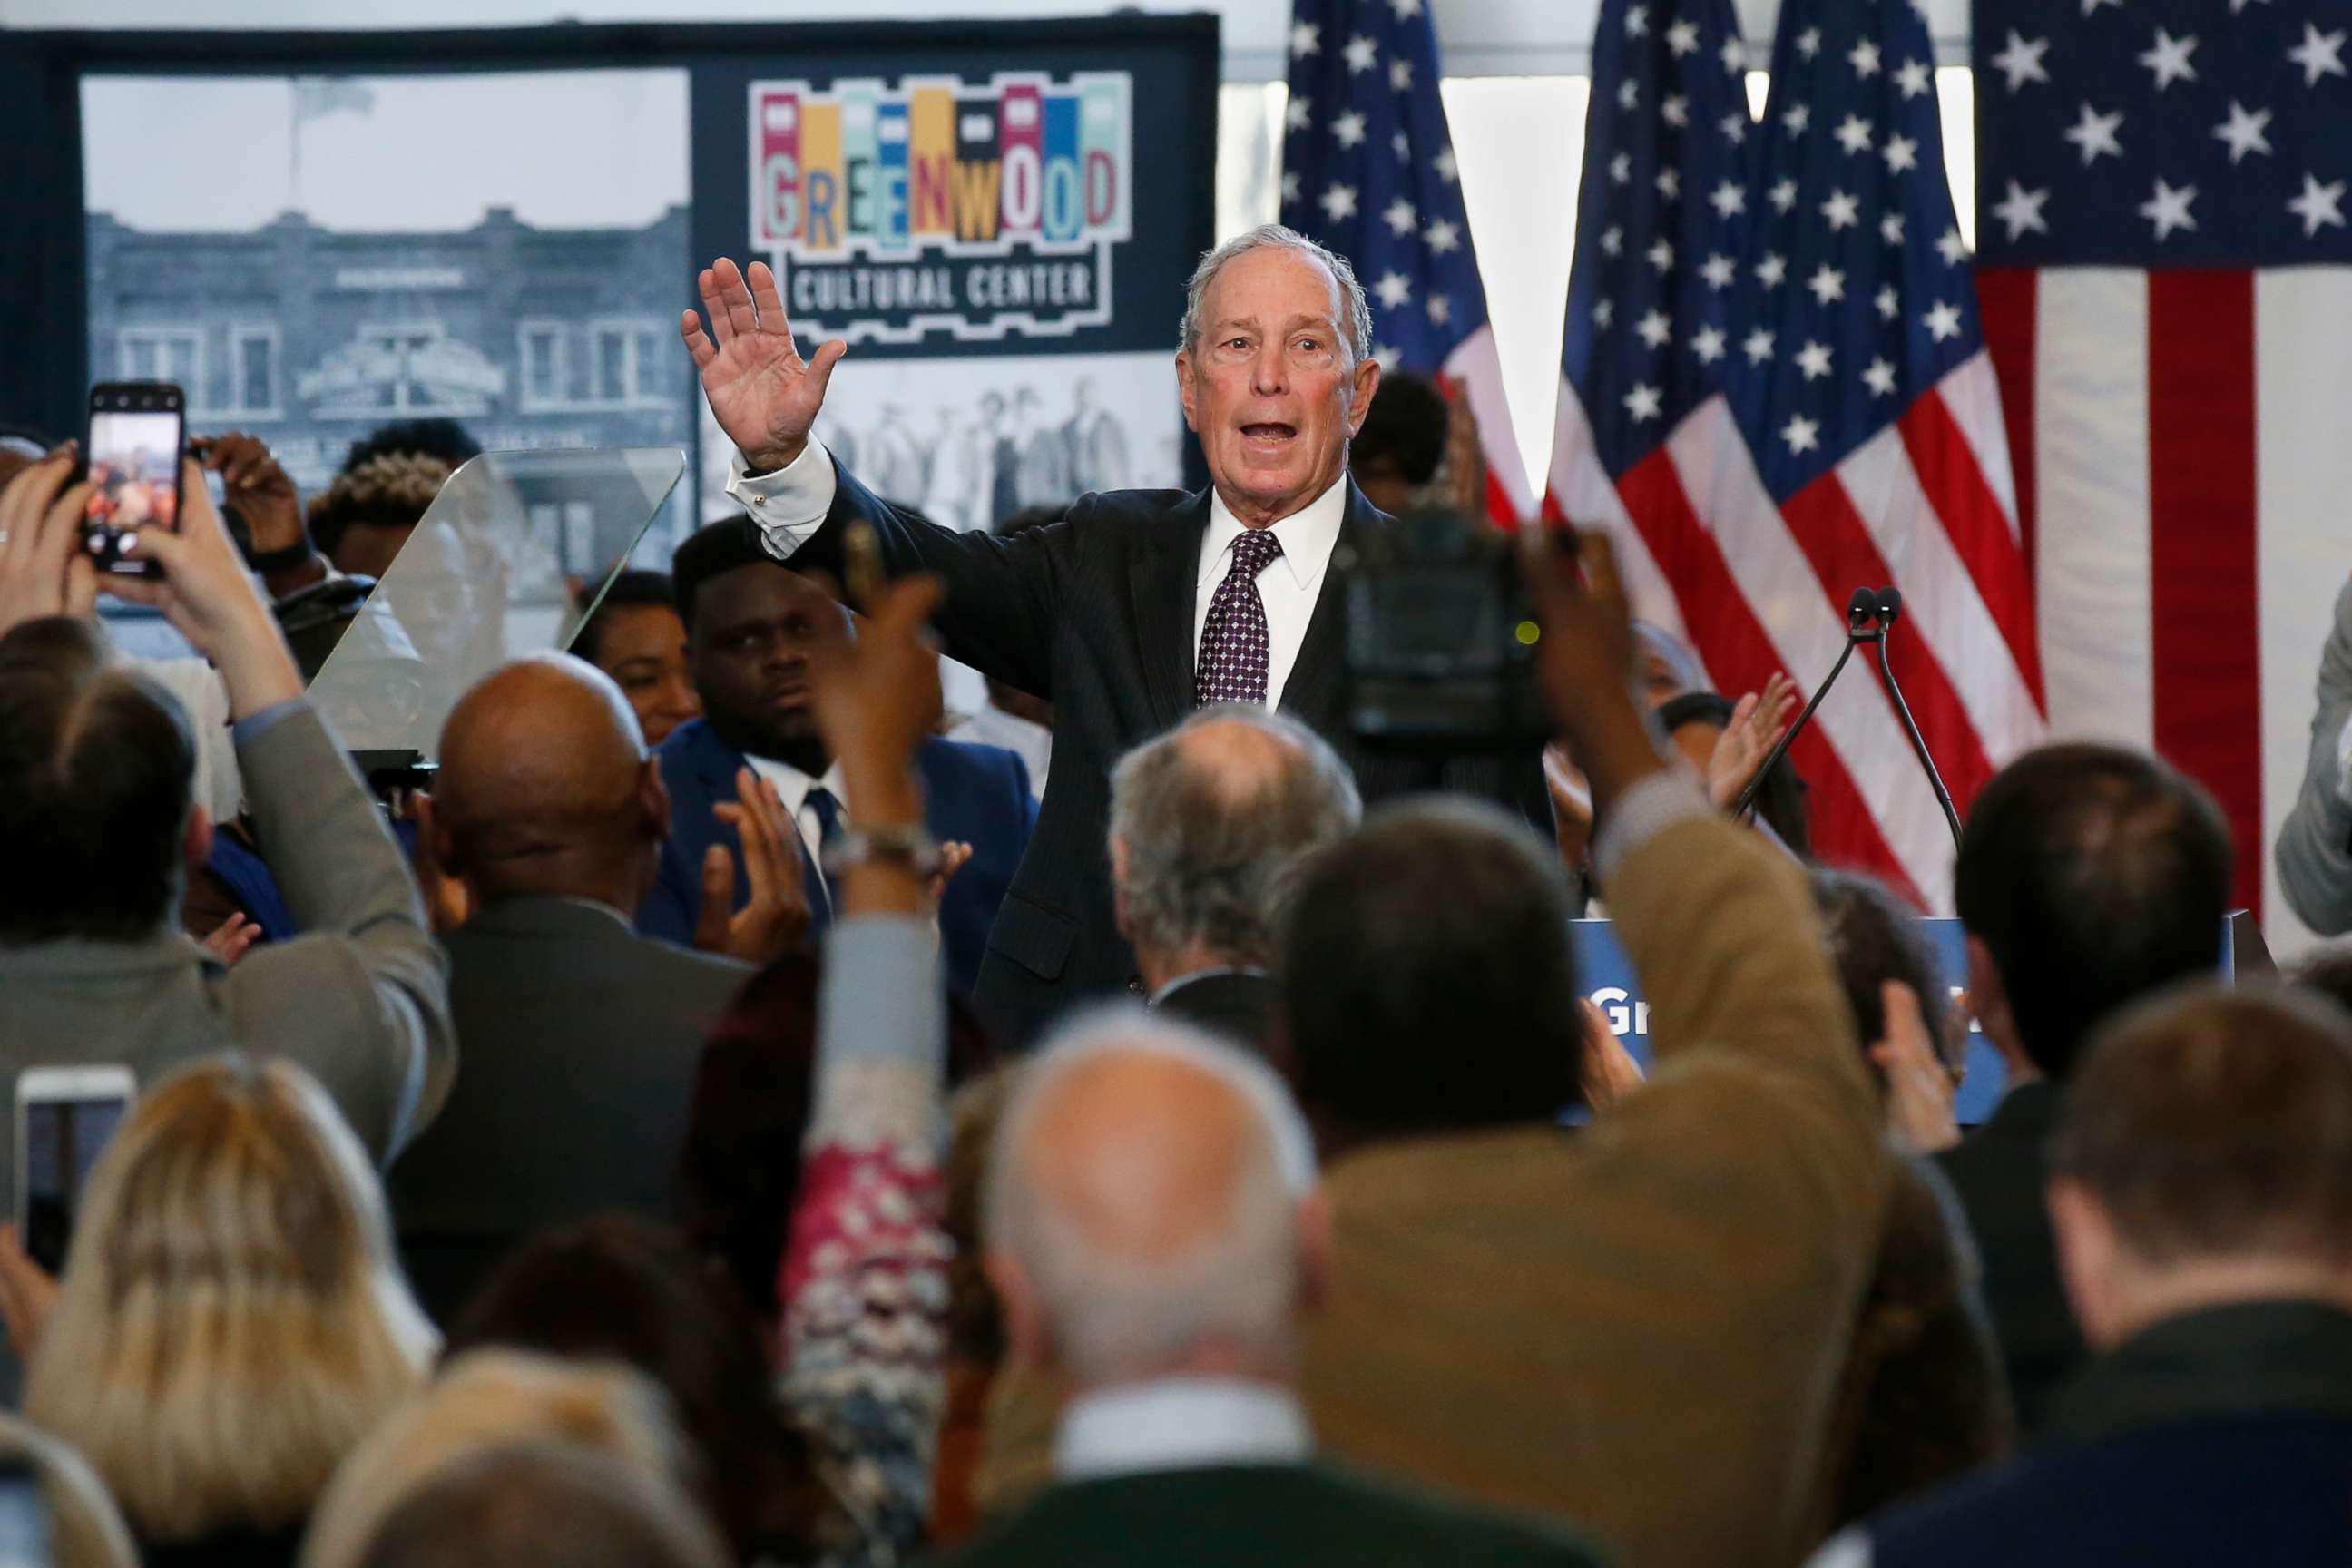 PHOTO: Democratic presidential candidate Michael Bloomberg waves to the crowd at the conclusion of his speech at the Greenwood Cultural Center in Tulsa, Okla., Sunday, Jan. 19, 2020.